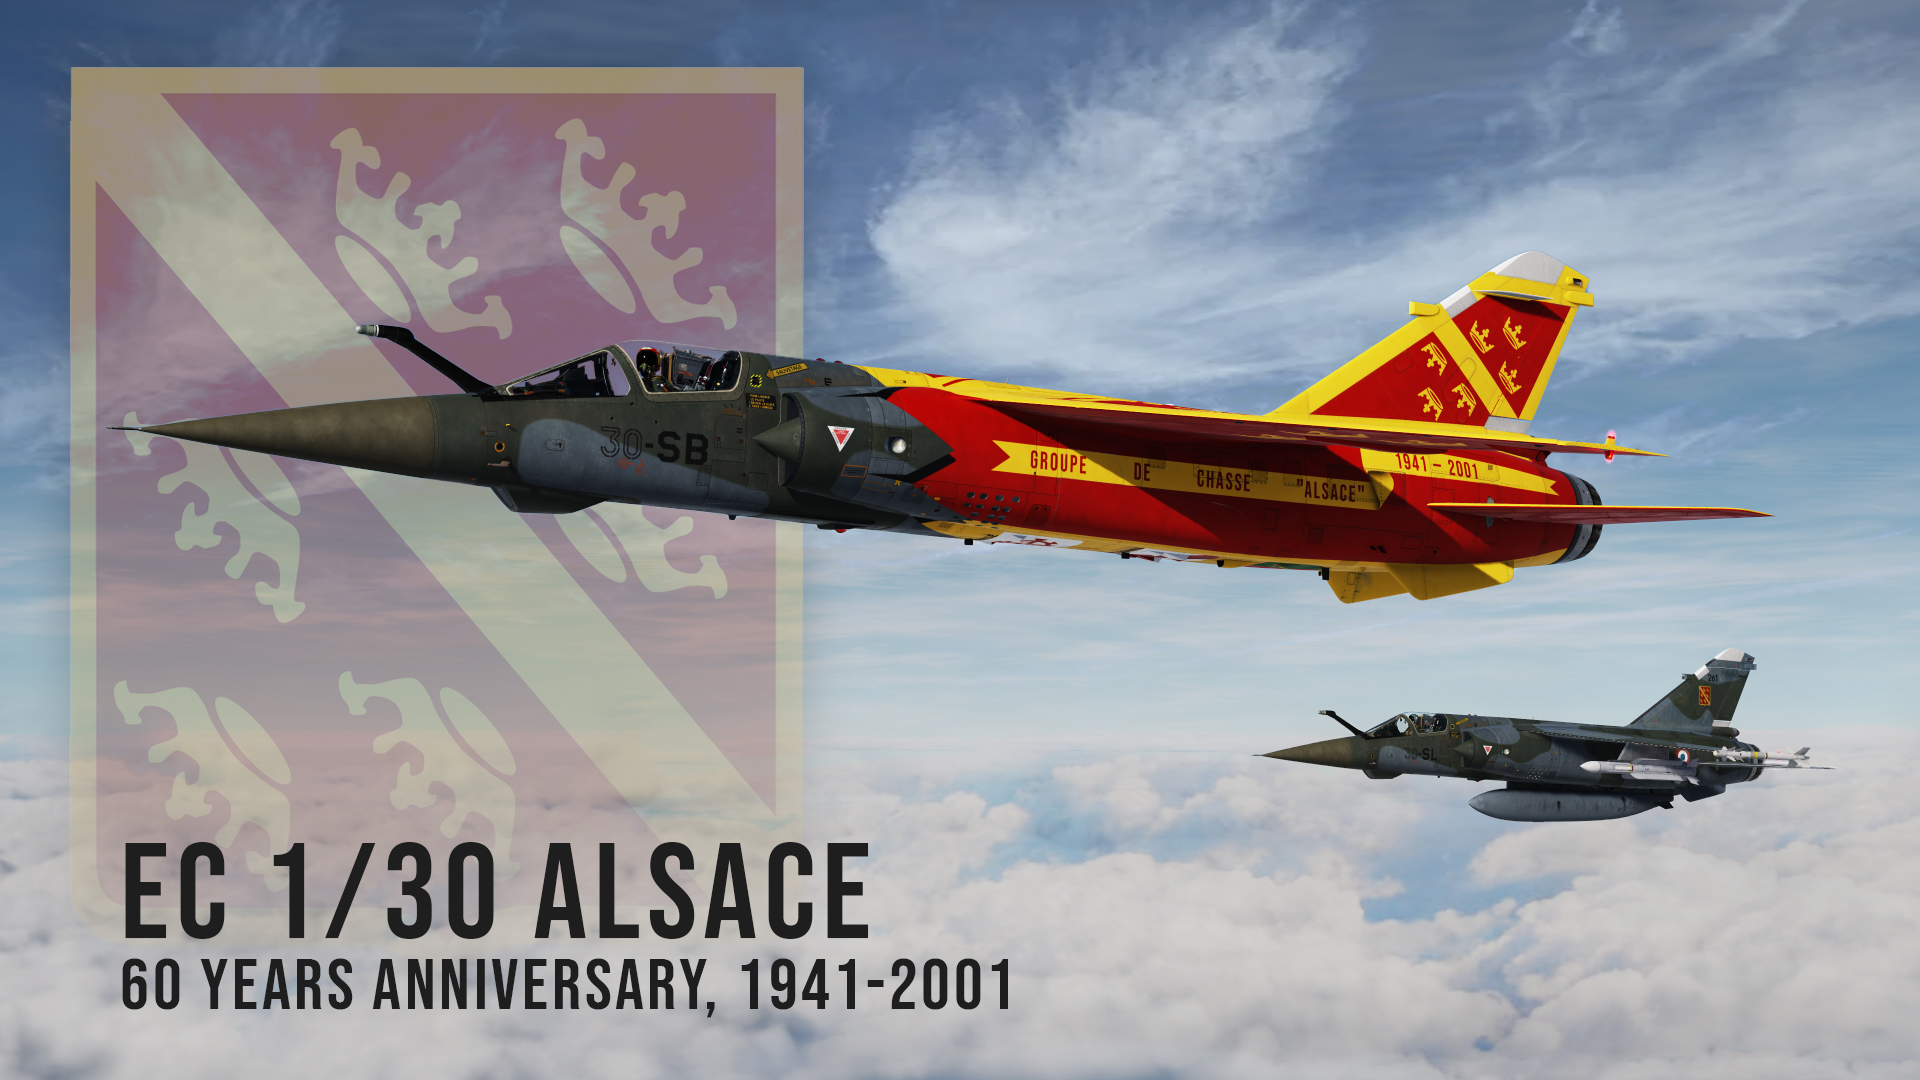 Mirage F1CT, EC 1/30 Alsace, 60 years anniversay (2001) pack, V1.0